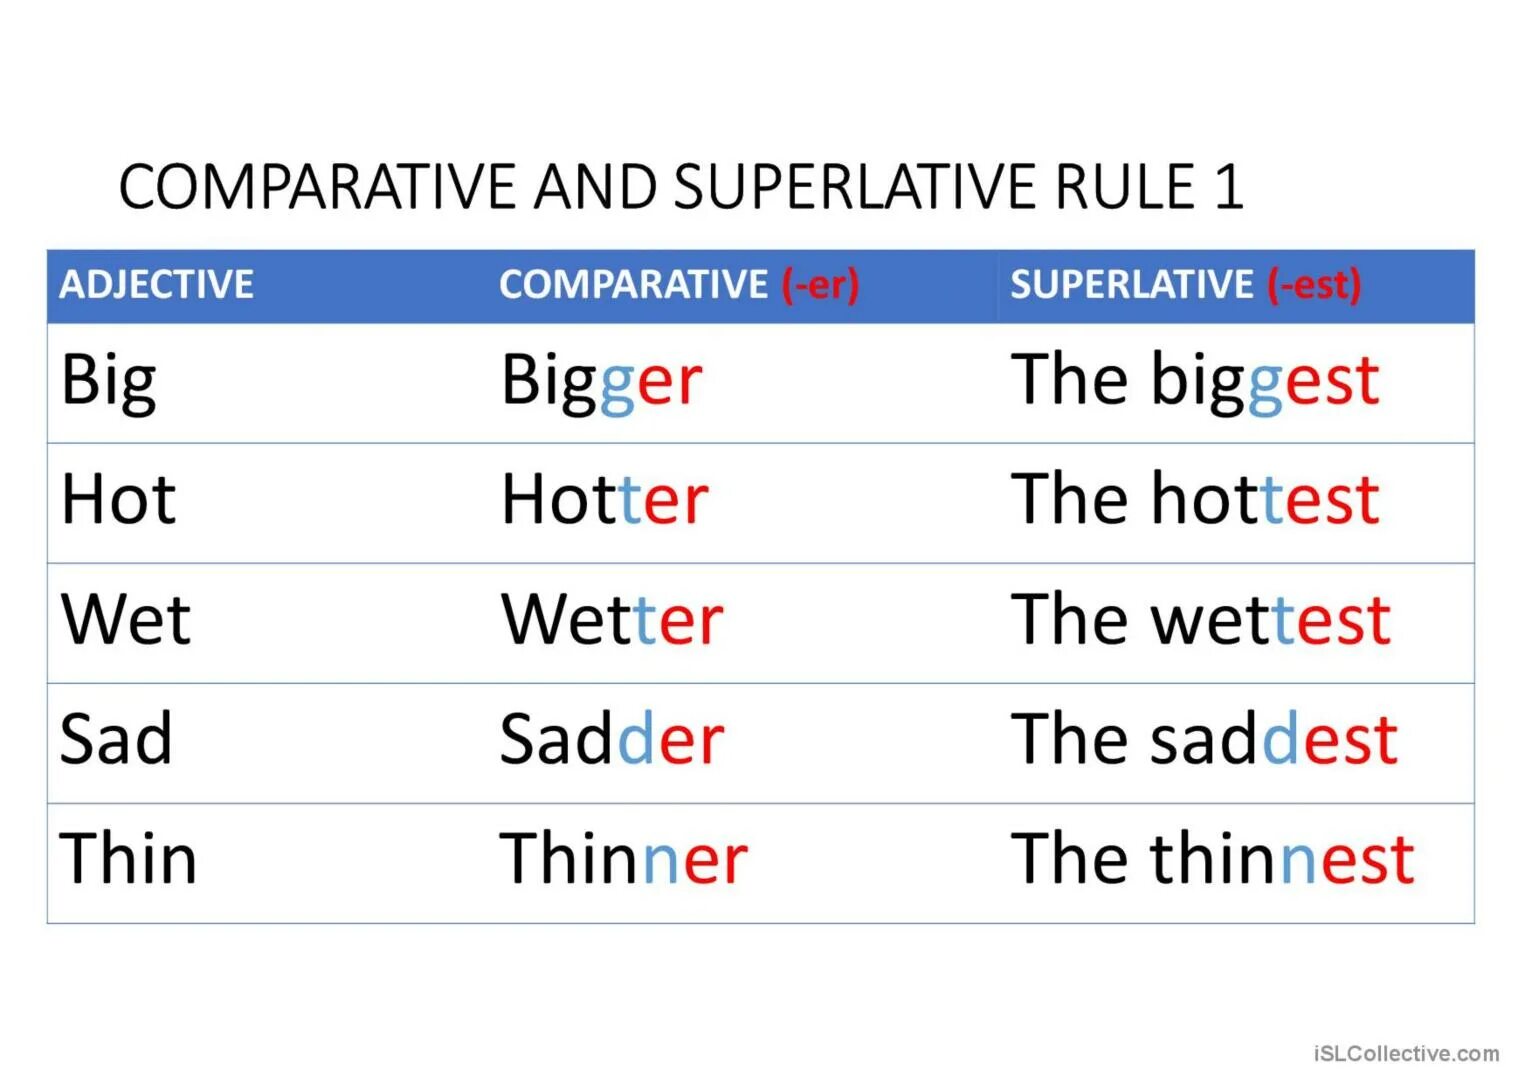 Comparatives and Superlatives правило. Comparative and Superlative adjectives правила. Comparative and Superlative adjectives правило. Superlative adjectives правило. Superlative adjectives hot